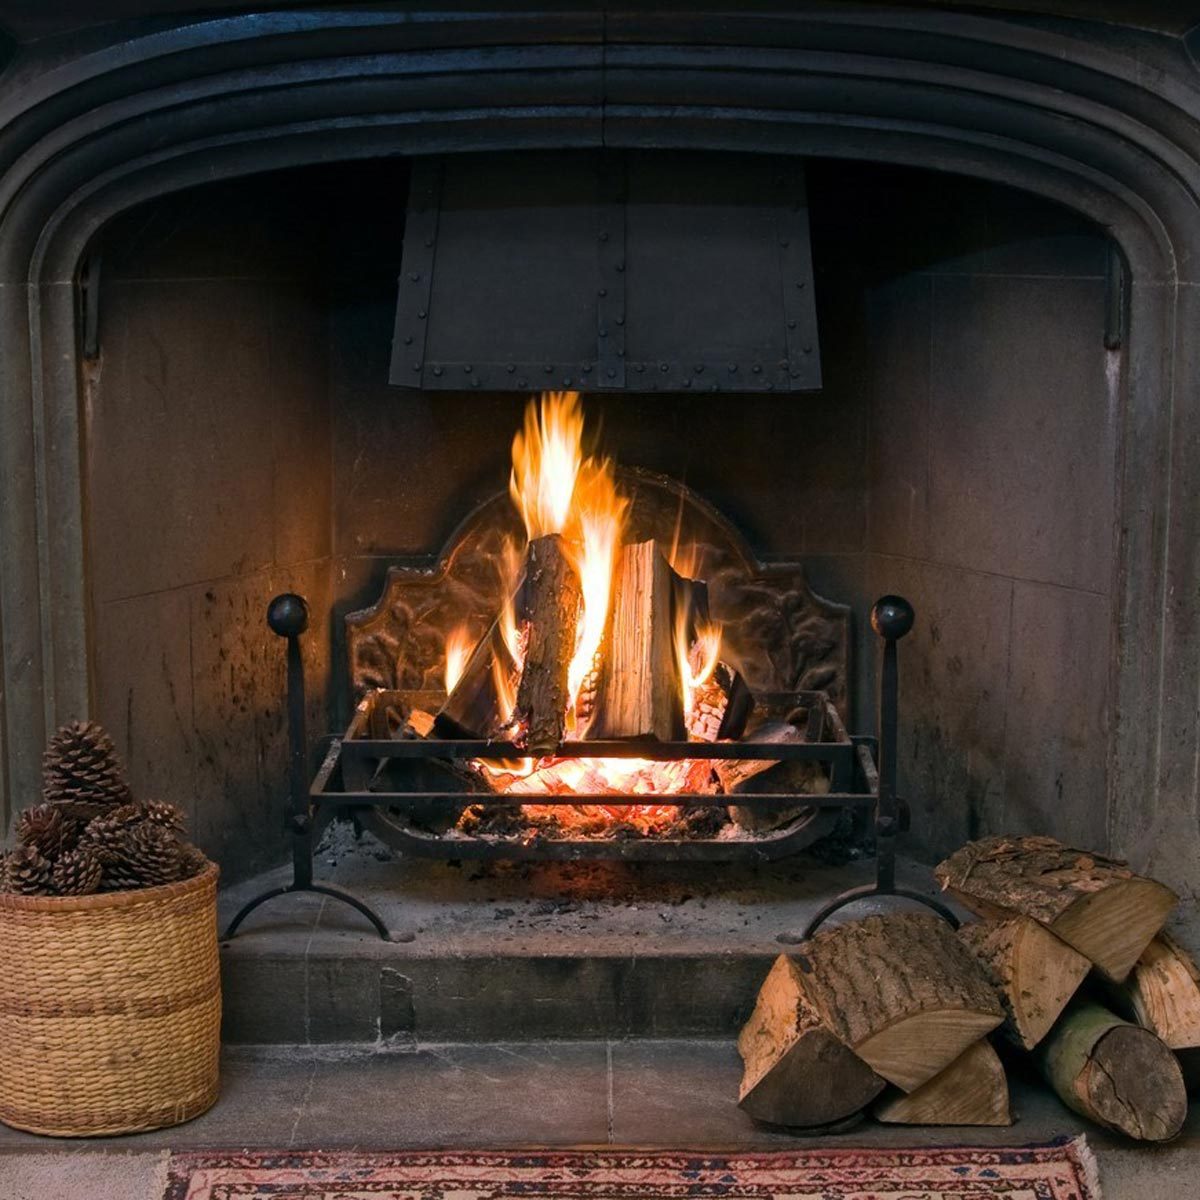 Tips for Building a Fire in a Fireplace